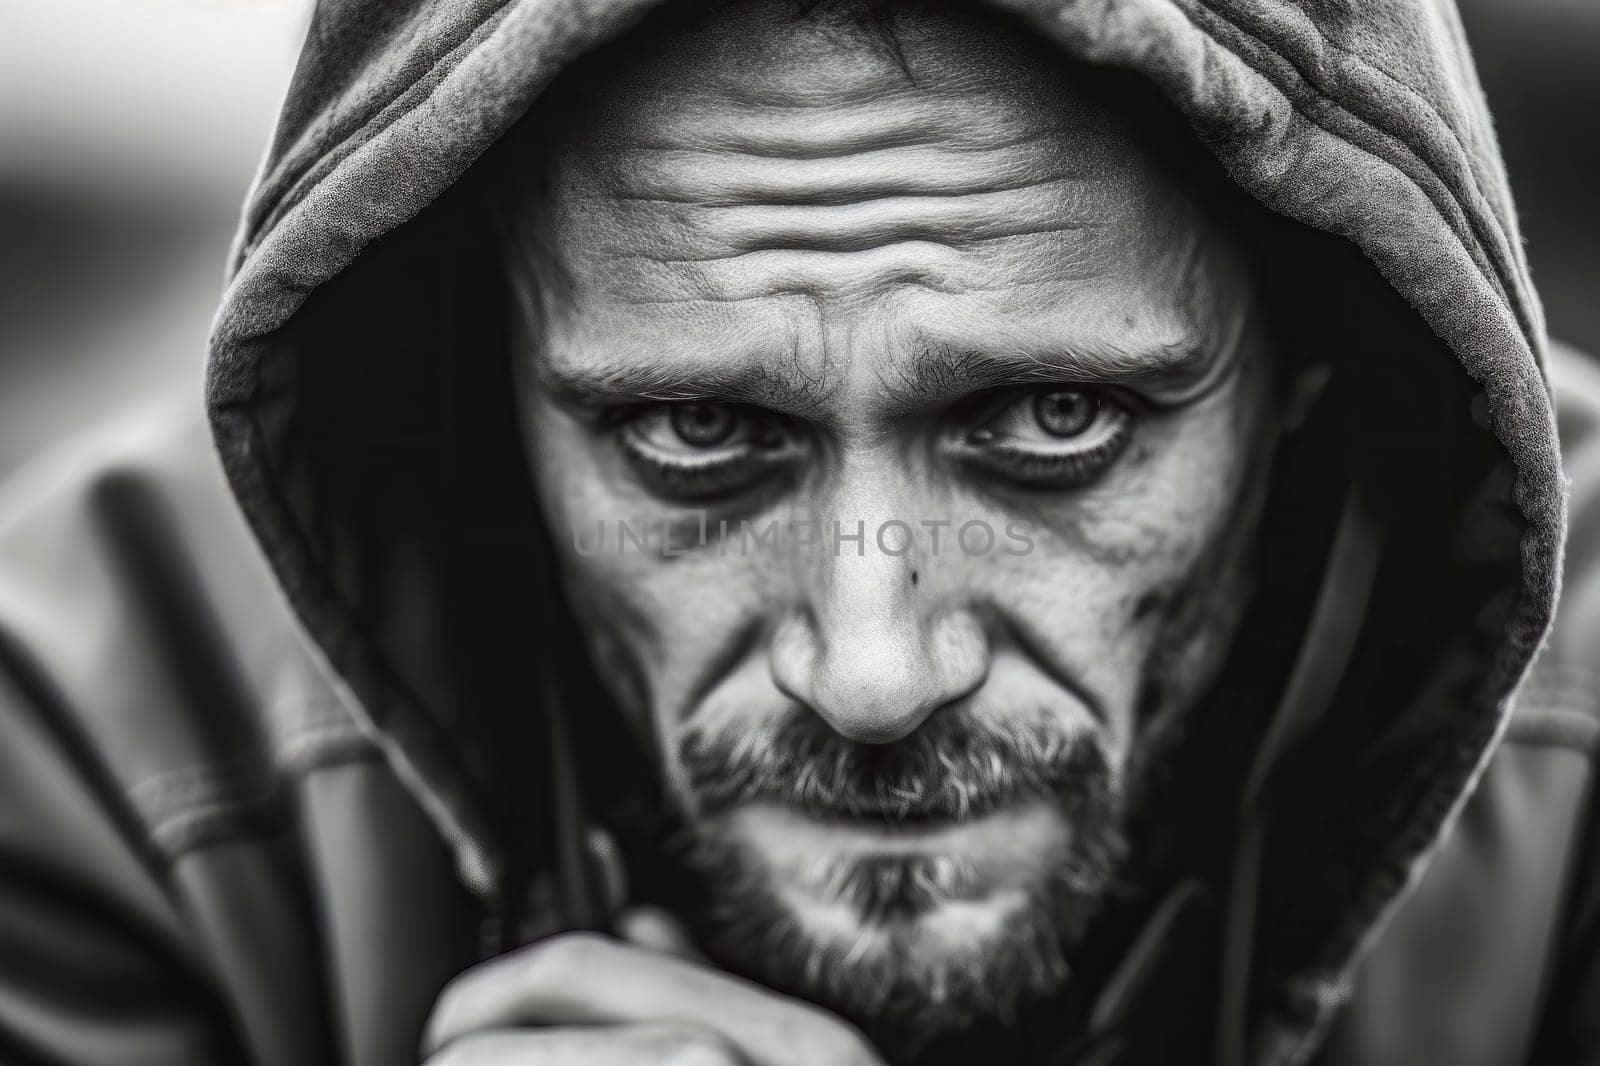 A poignant and evocative portrait of a man wearing a hoodie, conveying a sense of melancholy and introspection.